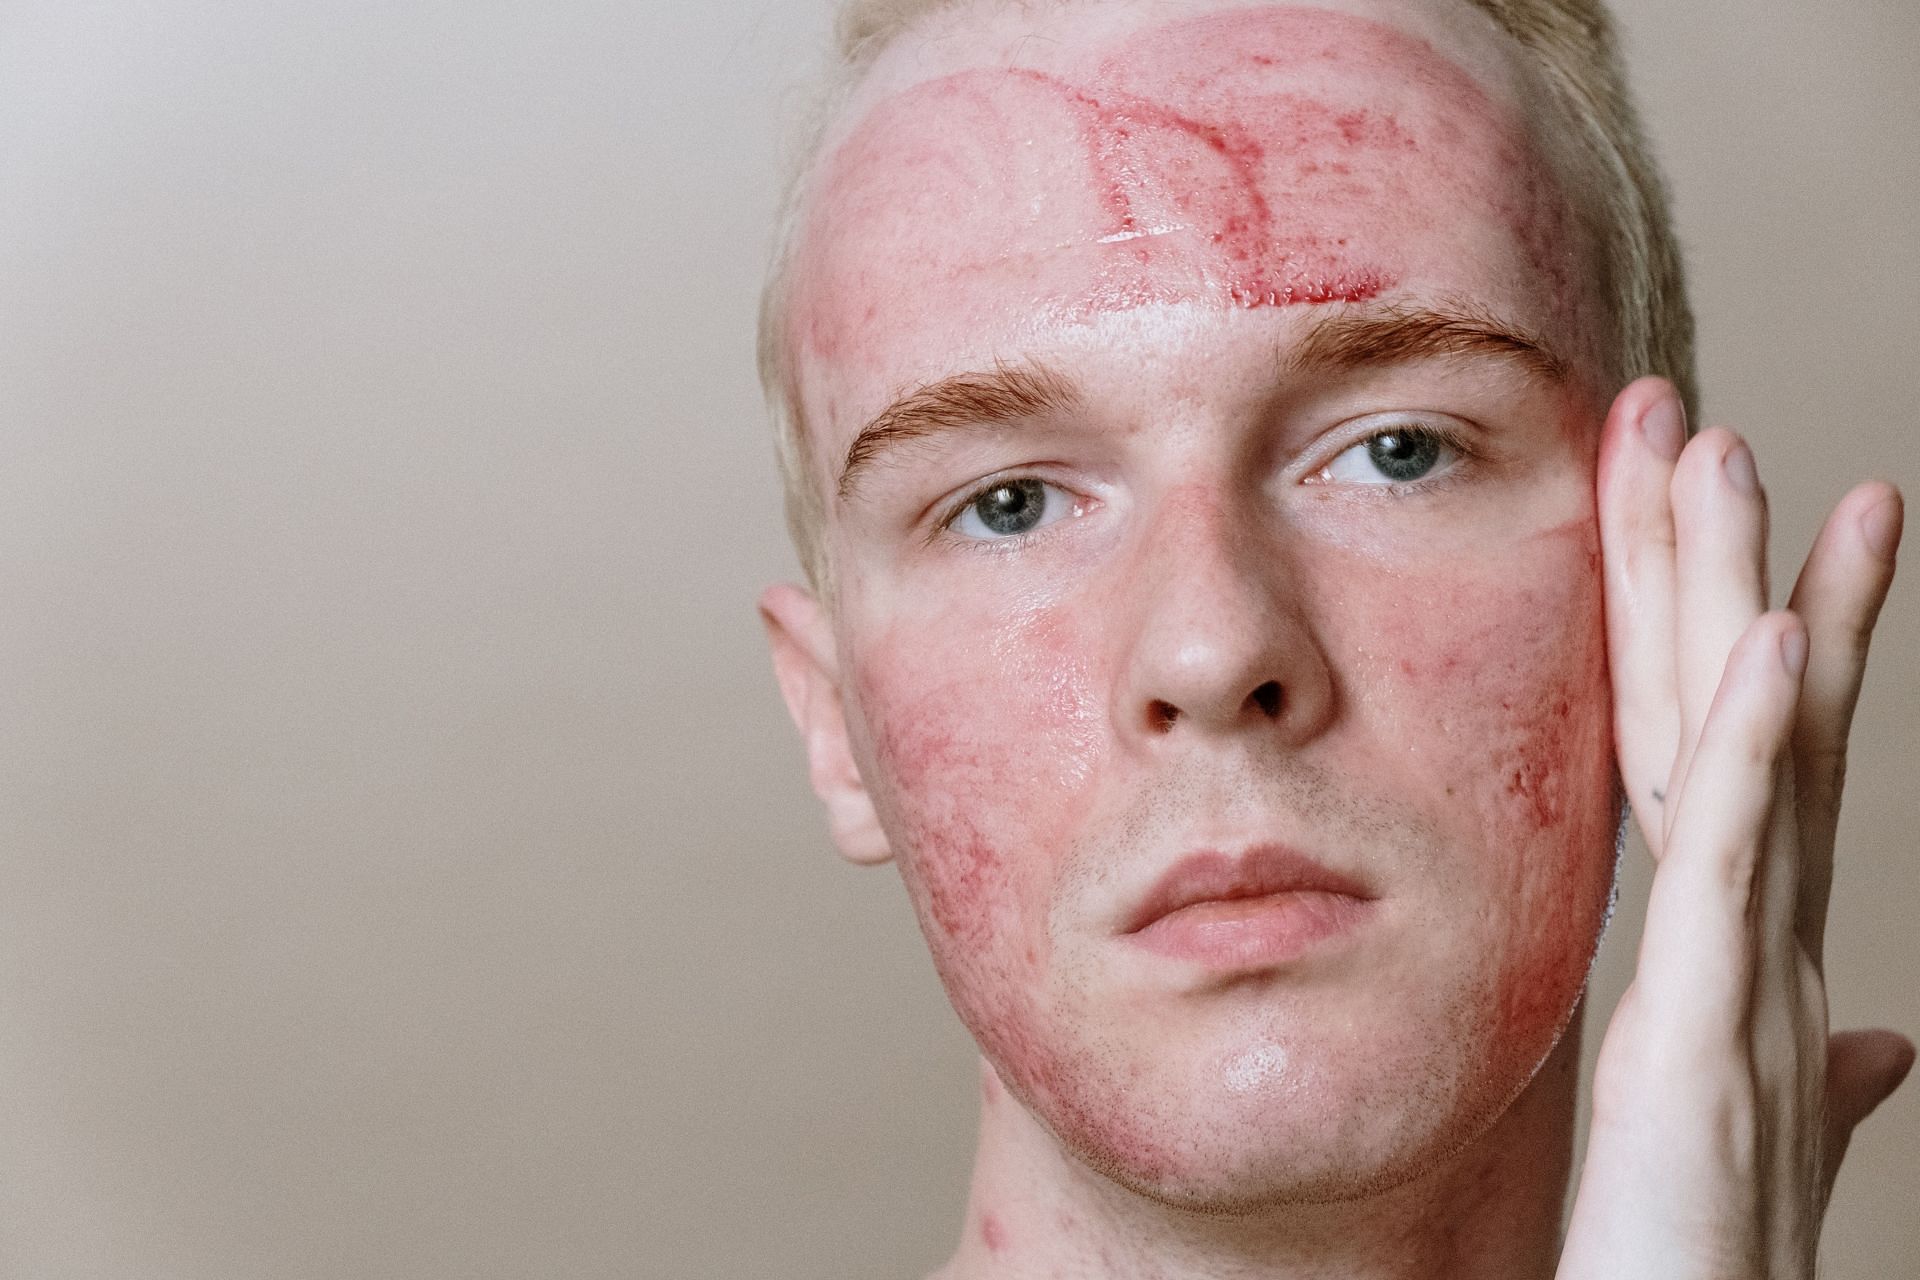 Red, inflamed patches on skin are common symptoms of rosacea (Image via Pexels/Cottonbro Studio)